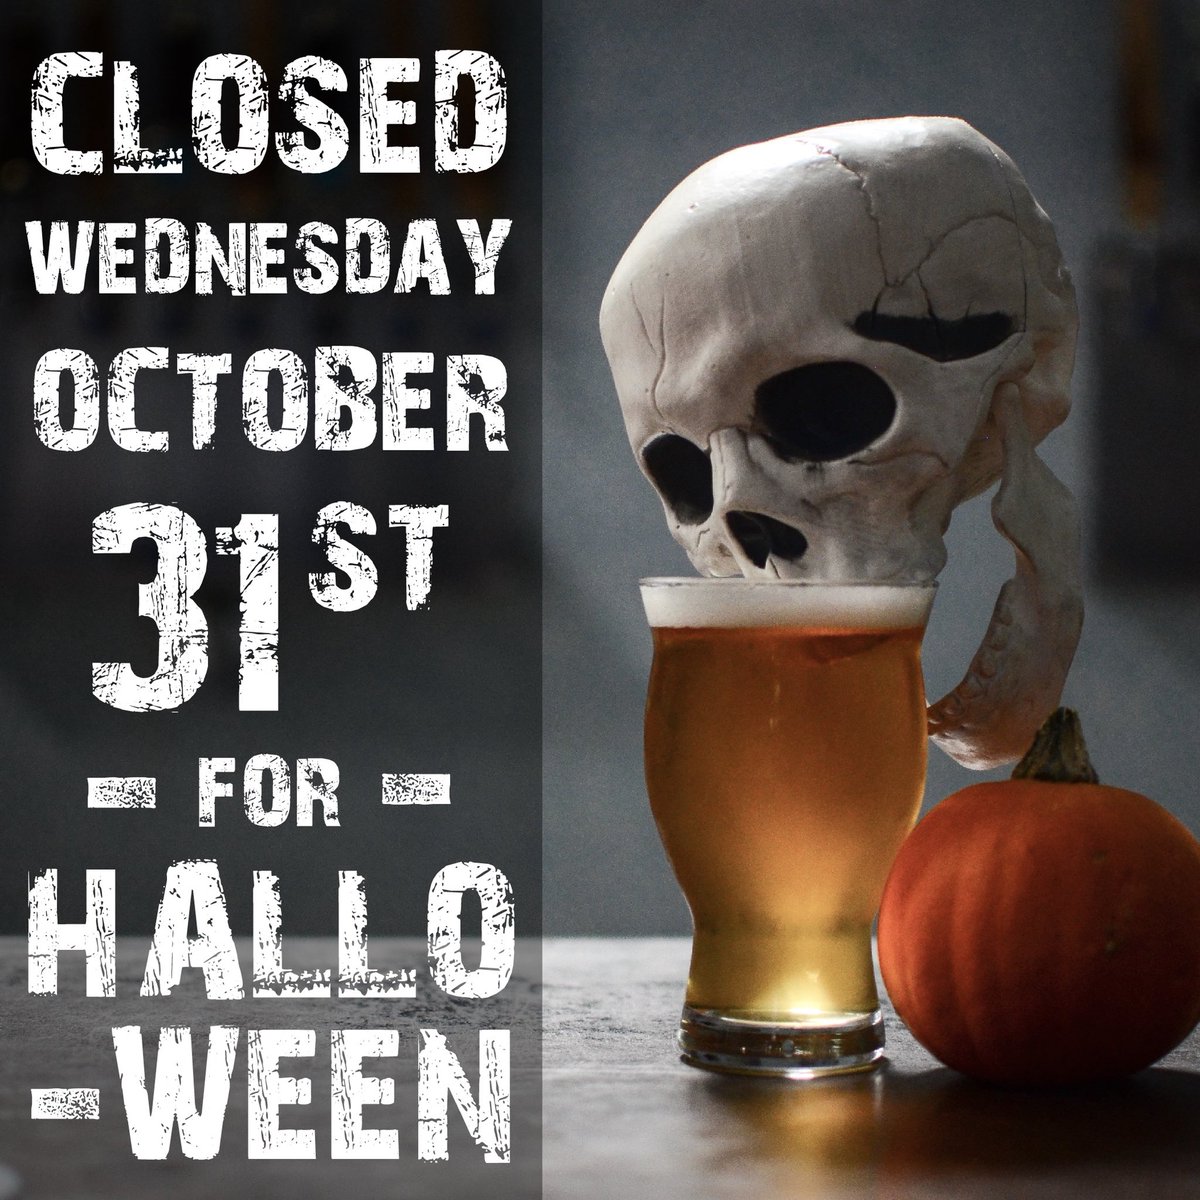 Heads up, guys. Our HB taproom will be closed tomorrow for Halloween! But fear not, we’ll be back to normal hours on Thursday. 💀🍺 #HB #HuntingtonBeach #Taproom #Closed #Halloween #BackOnThursday #BeachwoodBrewing #TruetoBeer